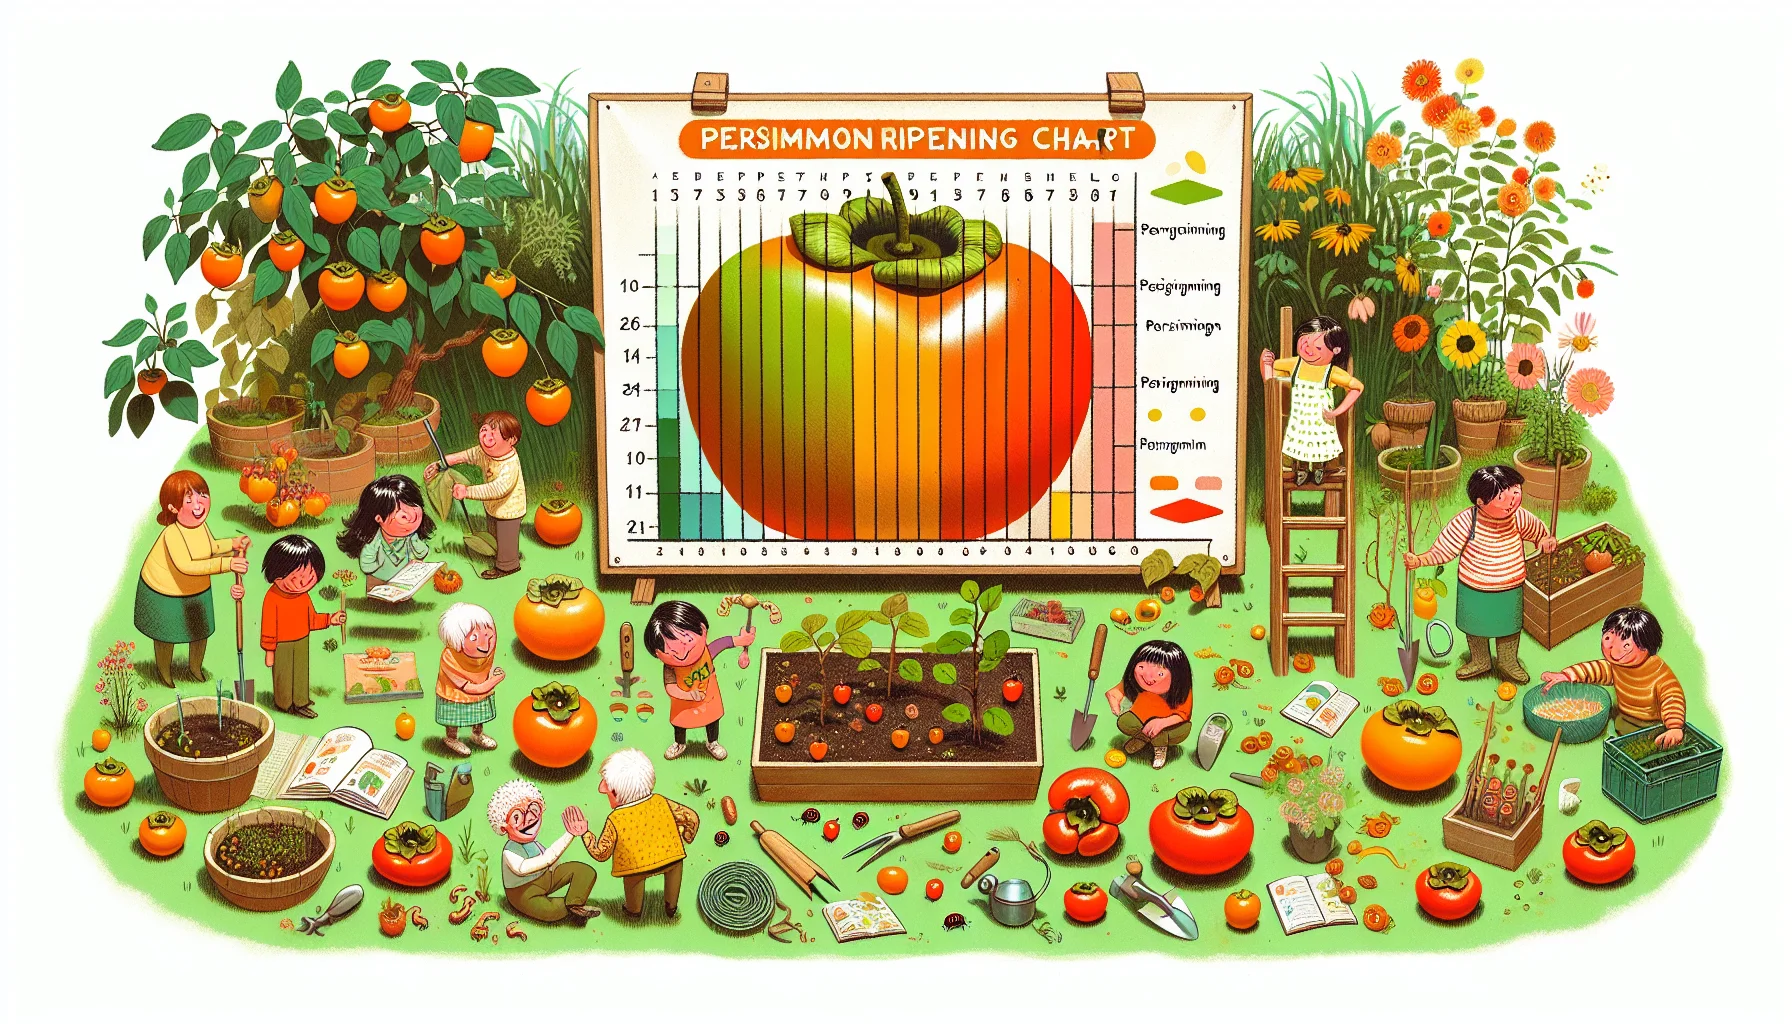 Create a lively and amusing illustration of a persimmon ripening chart in an enticing gardening scenario. The chart should feature persimmons at different stages of ripeness, from green all the way to deeply orange. Surrounding the chart, design a lively garden with plants, blooming flowers, gardening tools scattered about, and imagined garden creatures adding comedic charm, like a laughing worm or dancing ladybug. Leave a small space for a comically oversized persimmon being tended and admired by a group of diverse and jovially engaged gardeners of various descents and genders.